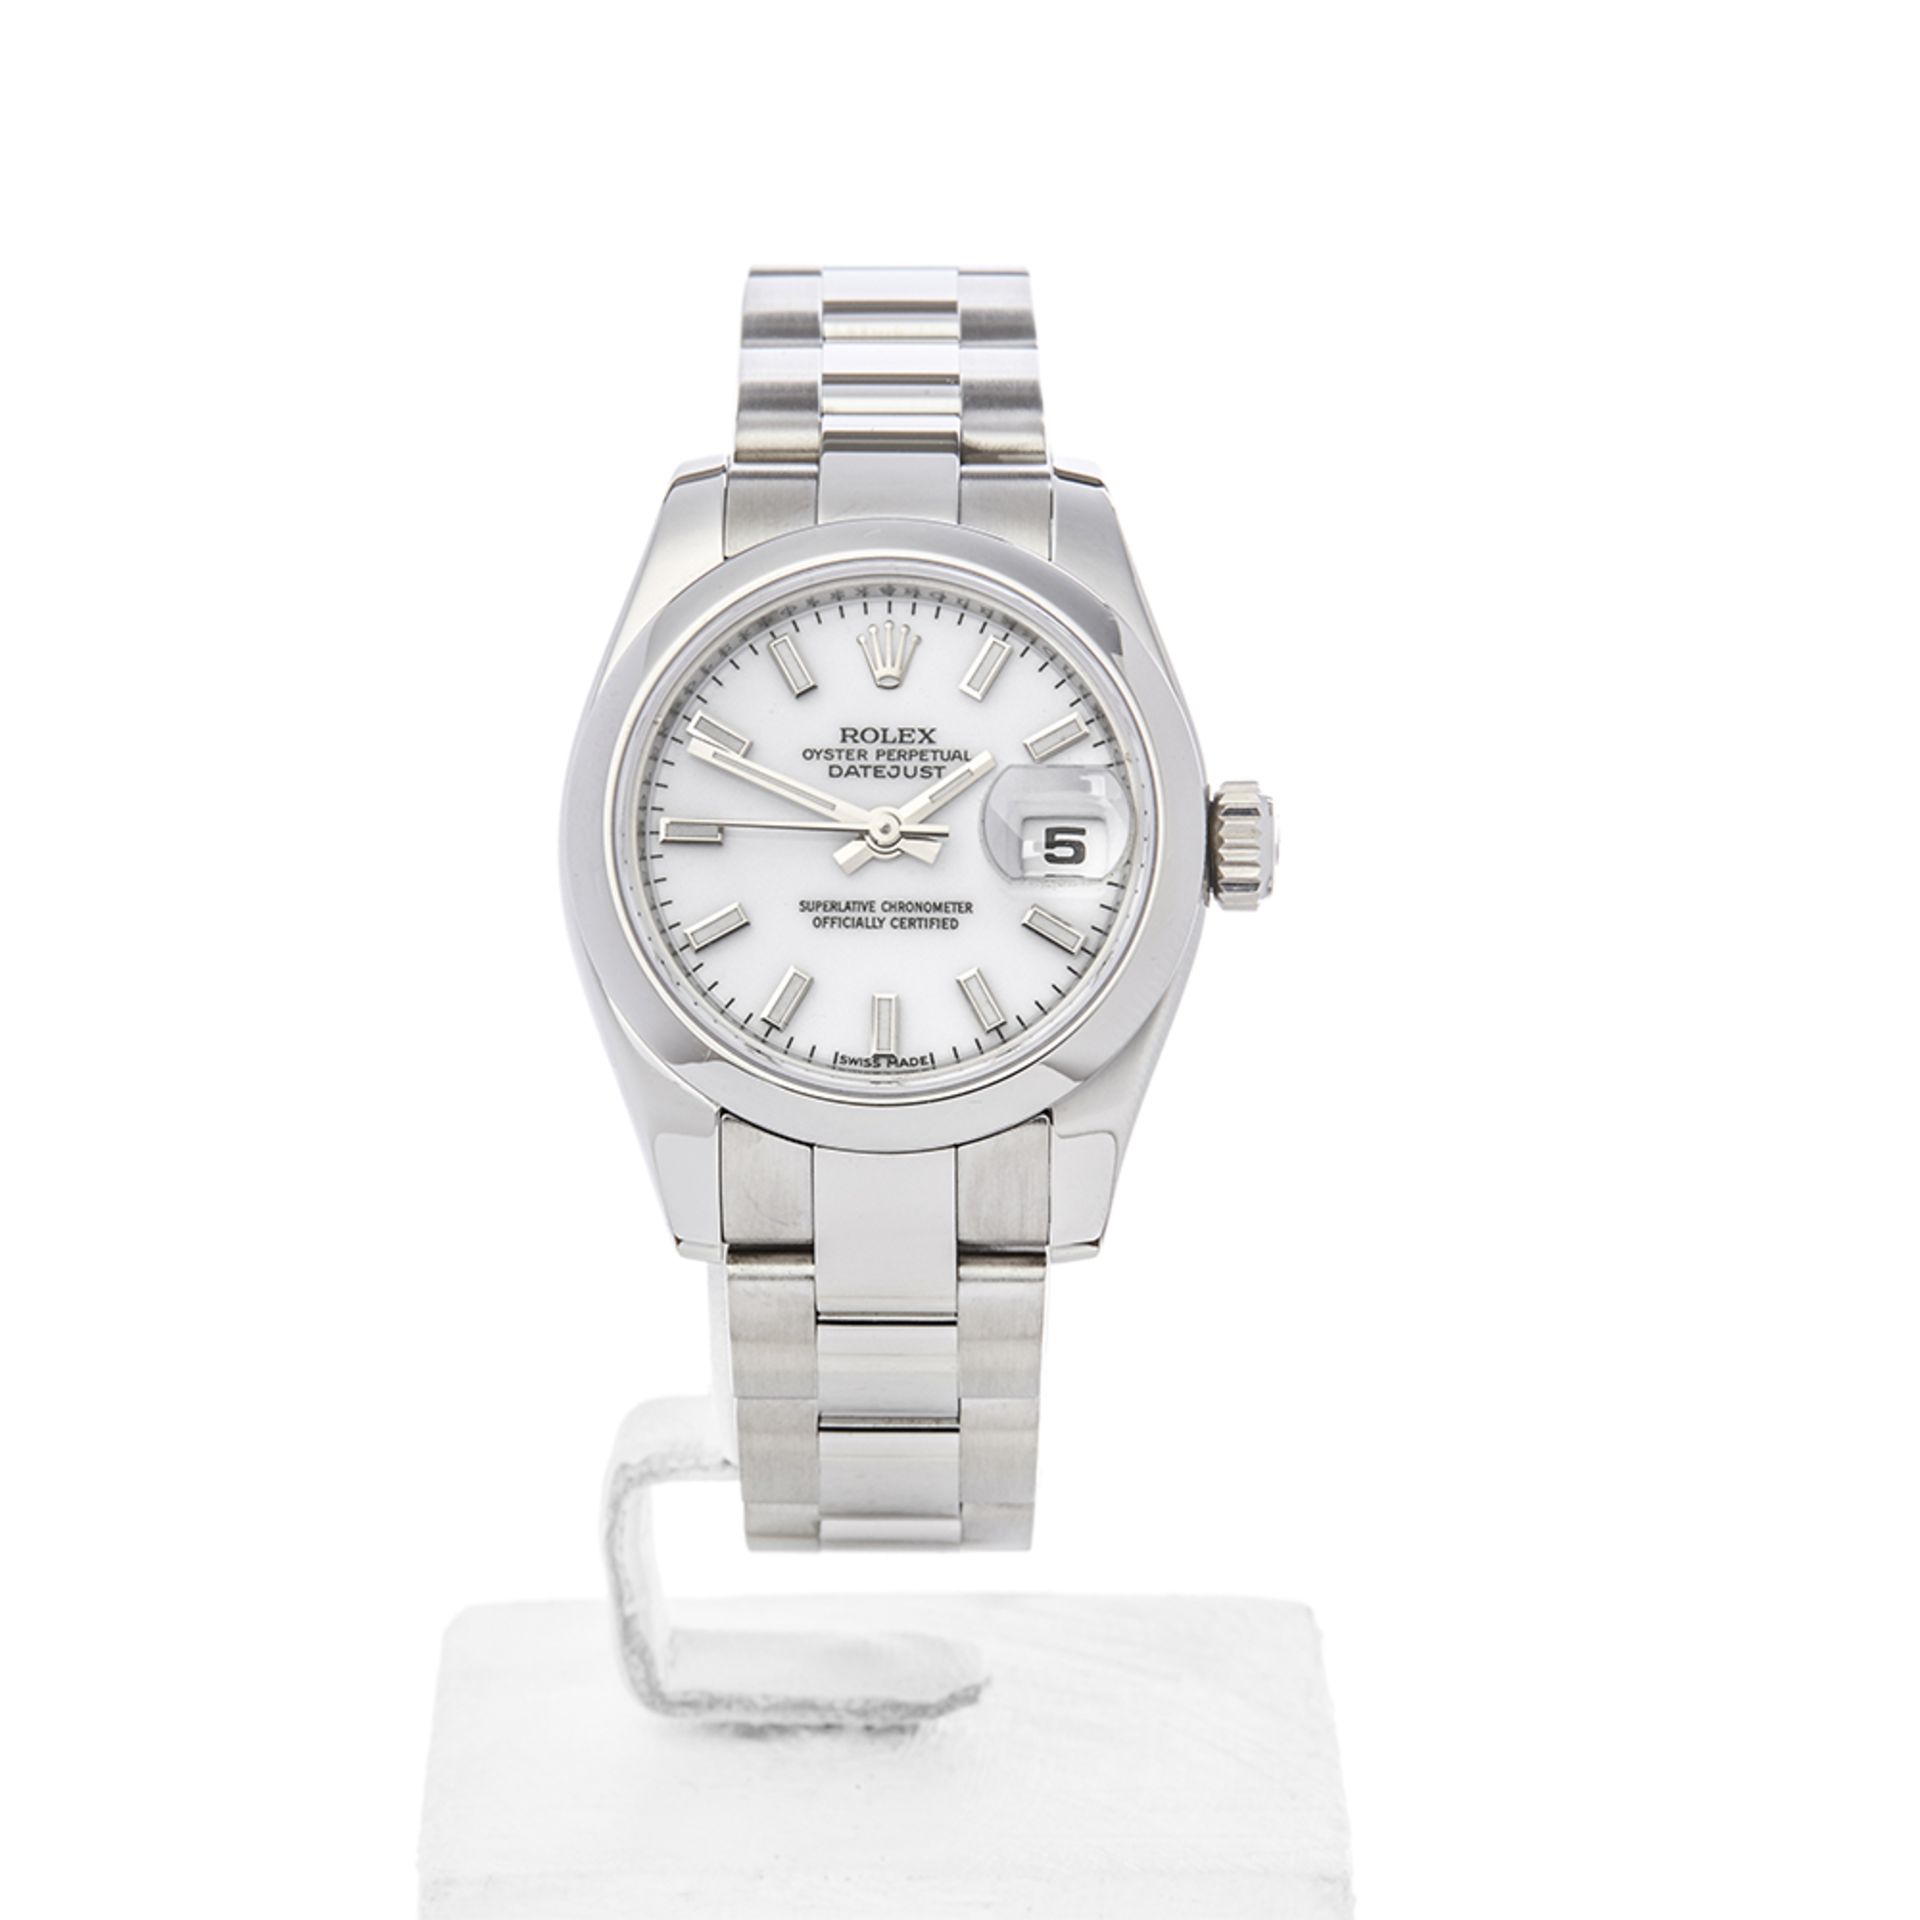 Datejust 26mm Stainless Steel - 179160 - Image 2 of 8